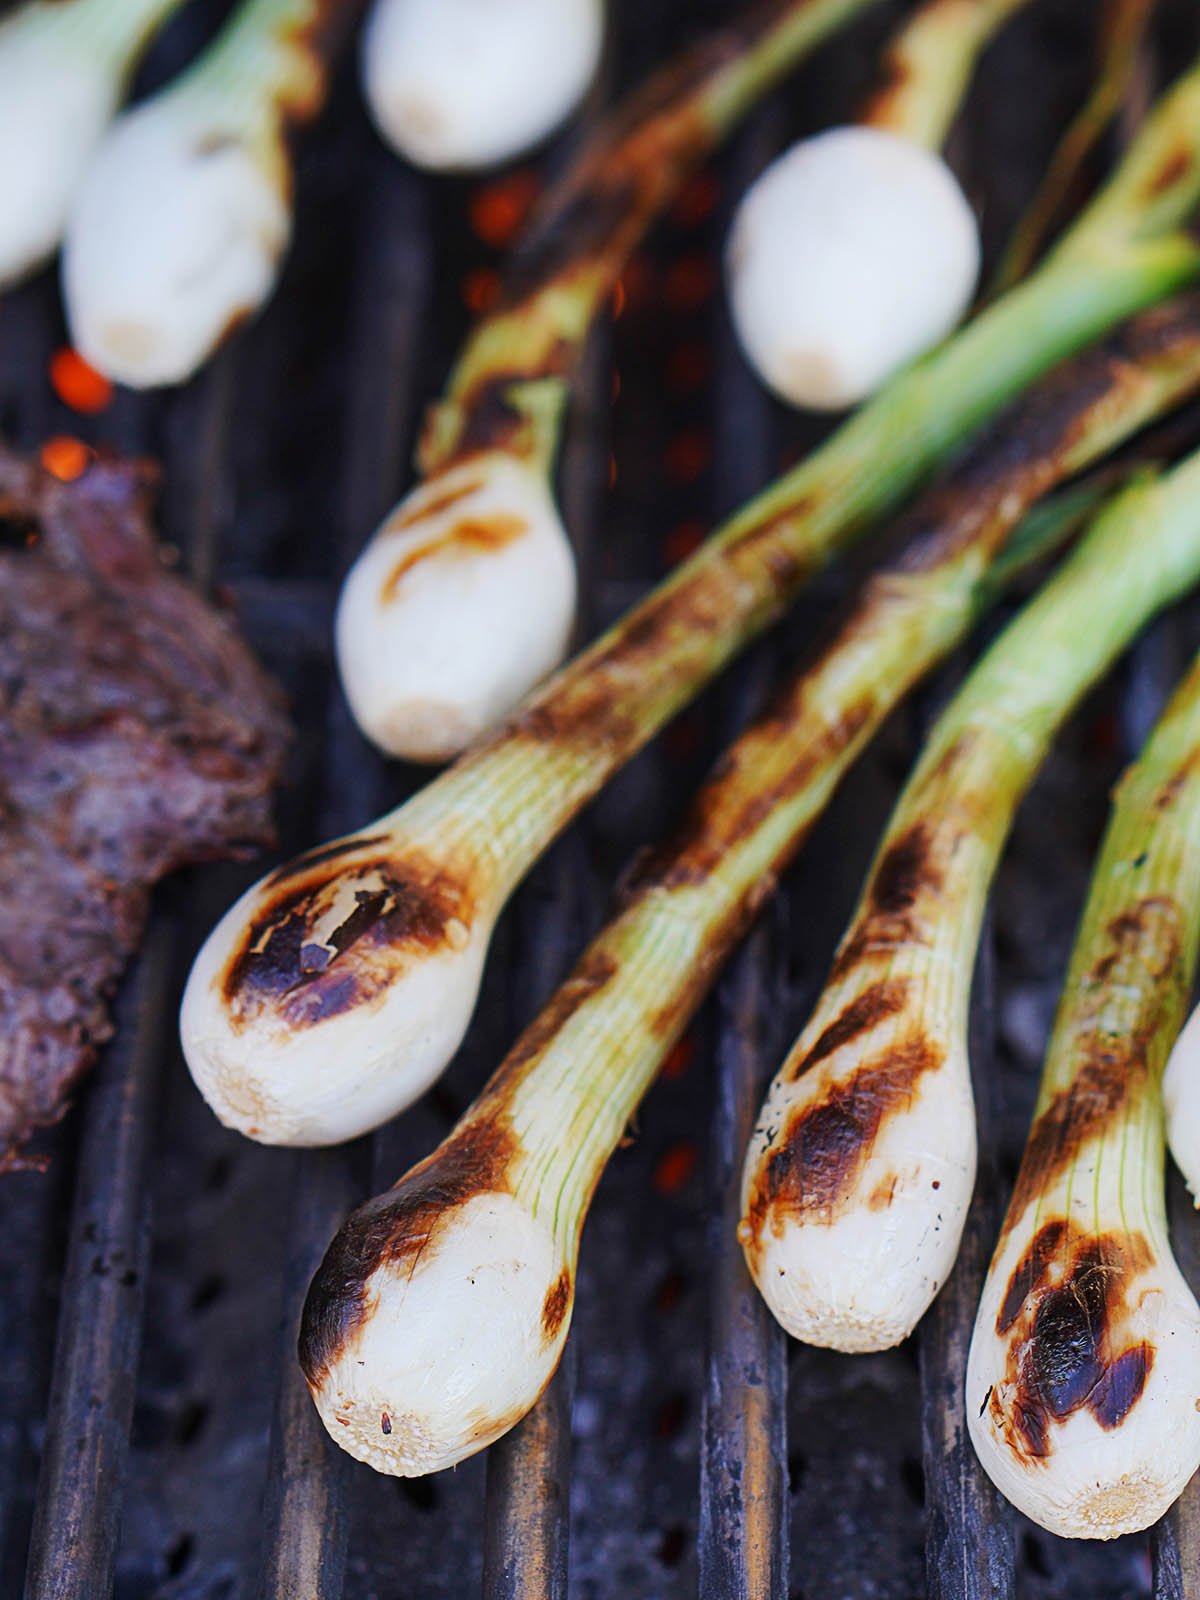 Green onions on a grill with carne asada on the side.